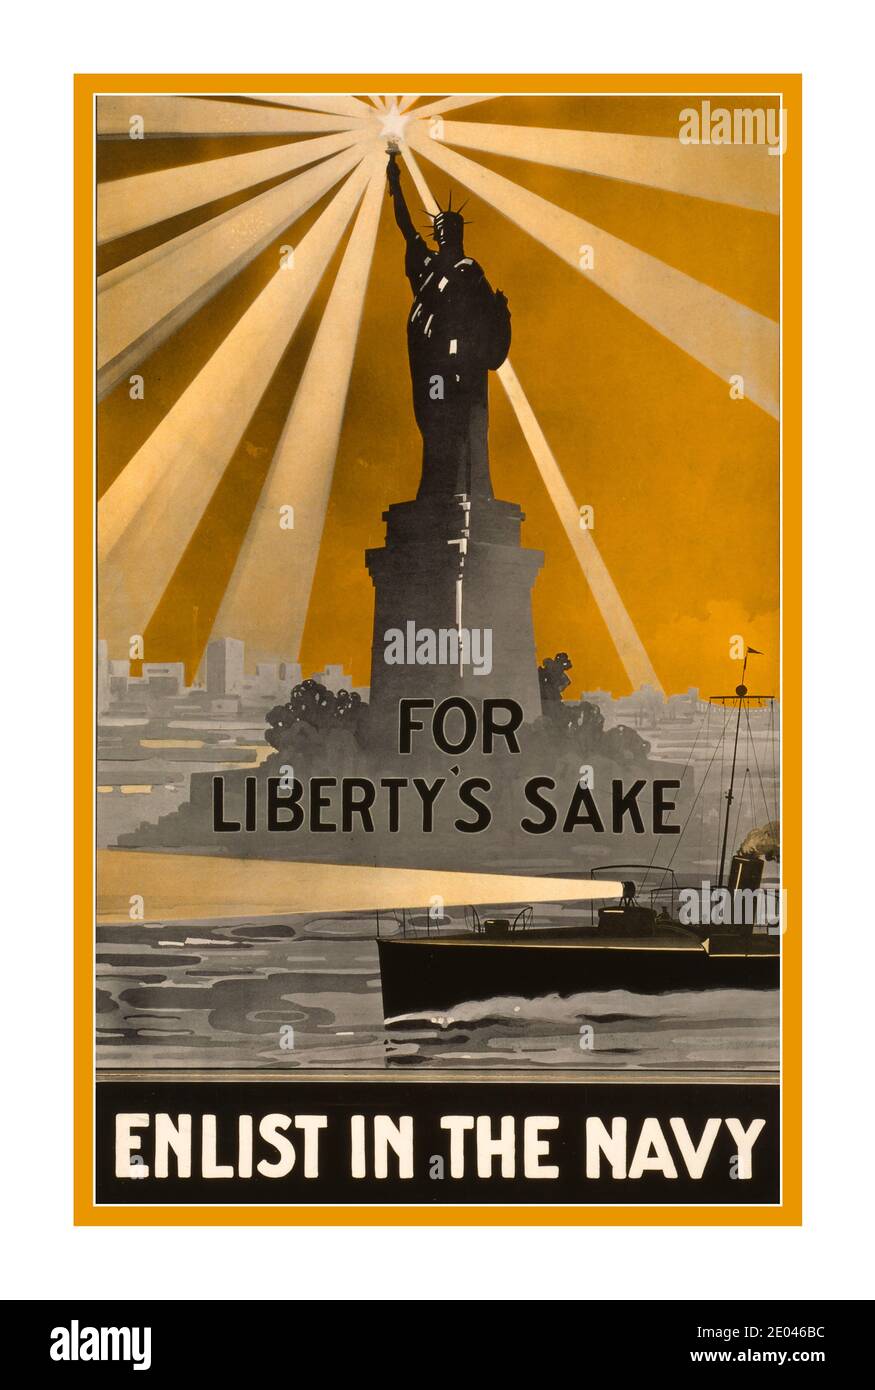 WW1 Propaganda Recruitment Poster USA “For Liberty's sake, enlist in the Navy” Poster showing the Statue of Liberty beaming brightly over a patrol boat. Boston : Smith & Porter Press, [1917] World War 1 -  United States.--Navy--Recruiting & enlistment--1910-1920 -  Statue of Liberty National Monument (N.Y. and N.J.)--1910-1920 -  World War, 1914-1918--Recruiting & enlistment--United States -  Boats--1910-1920 Lithographs--Color--1910-1920. War posters--American--1910-1920.  Issued by City of Boston Committee on Public Safety. USA  America First World War Stock Photo